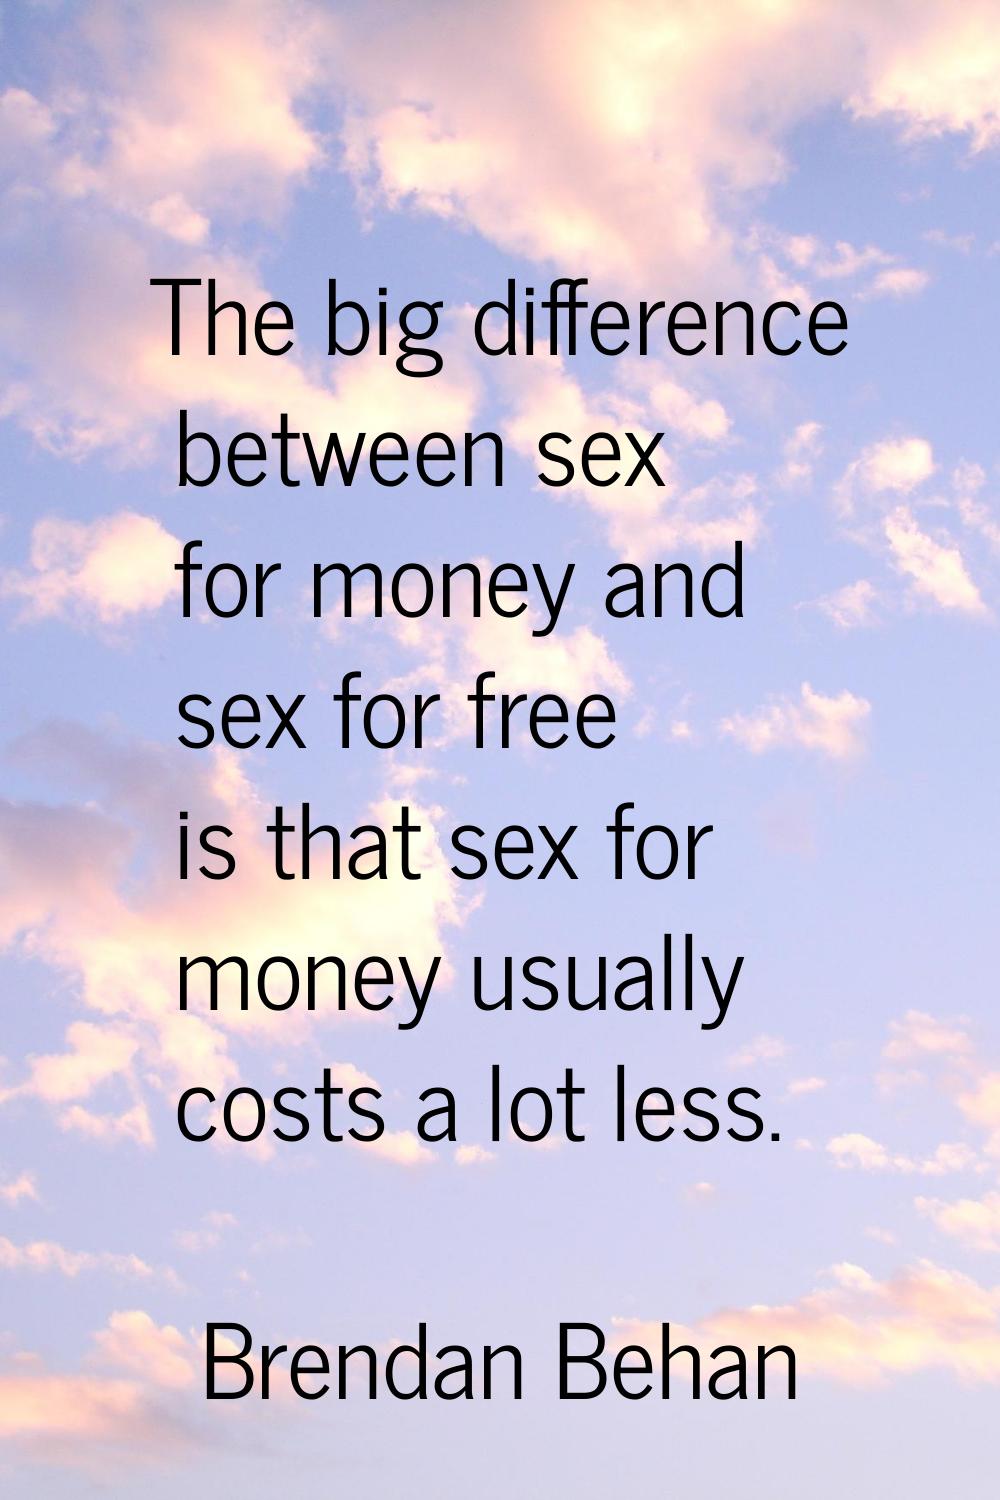 The big difference between sex for money and sex for free is that sex for money usually costs a lot